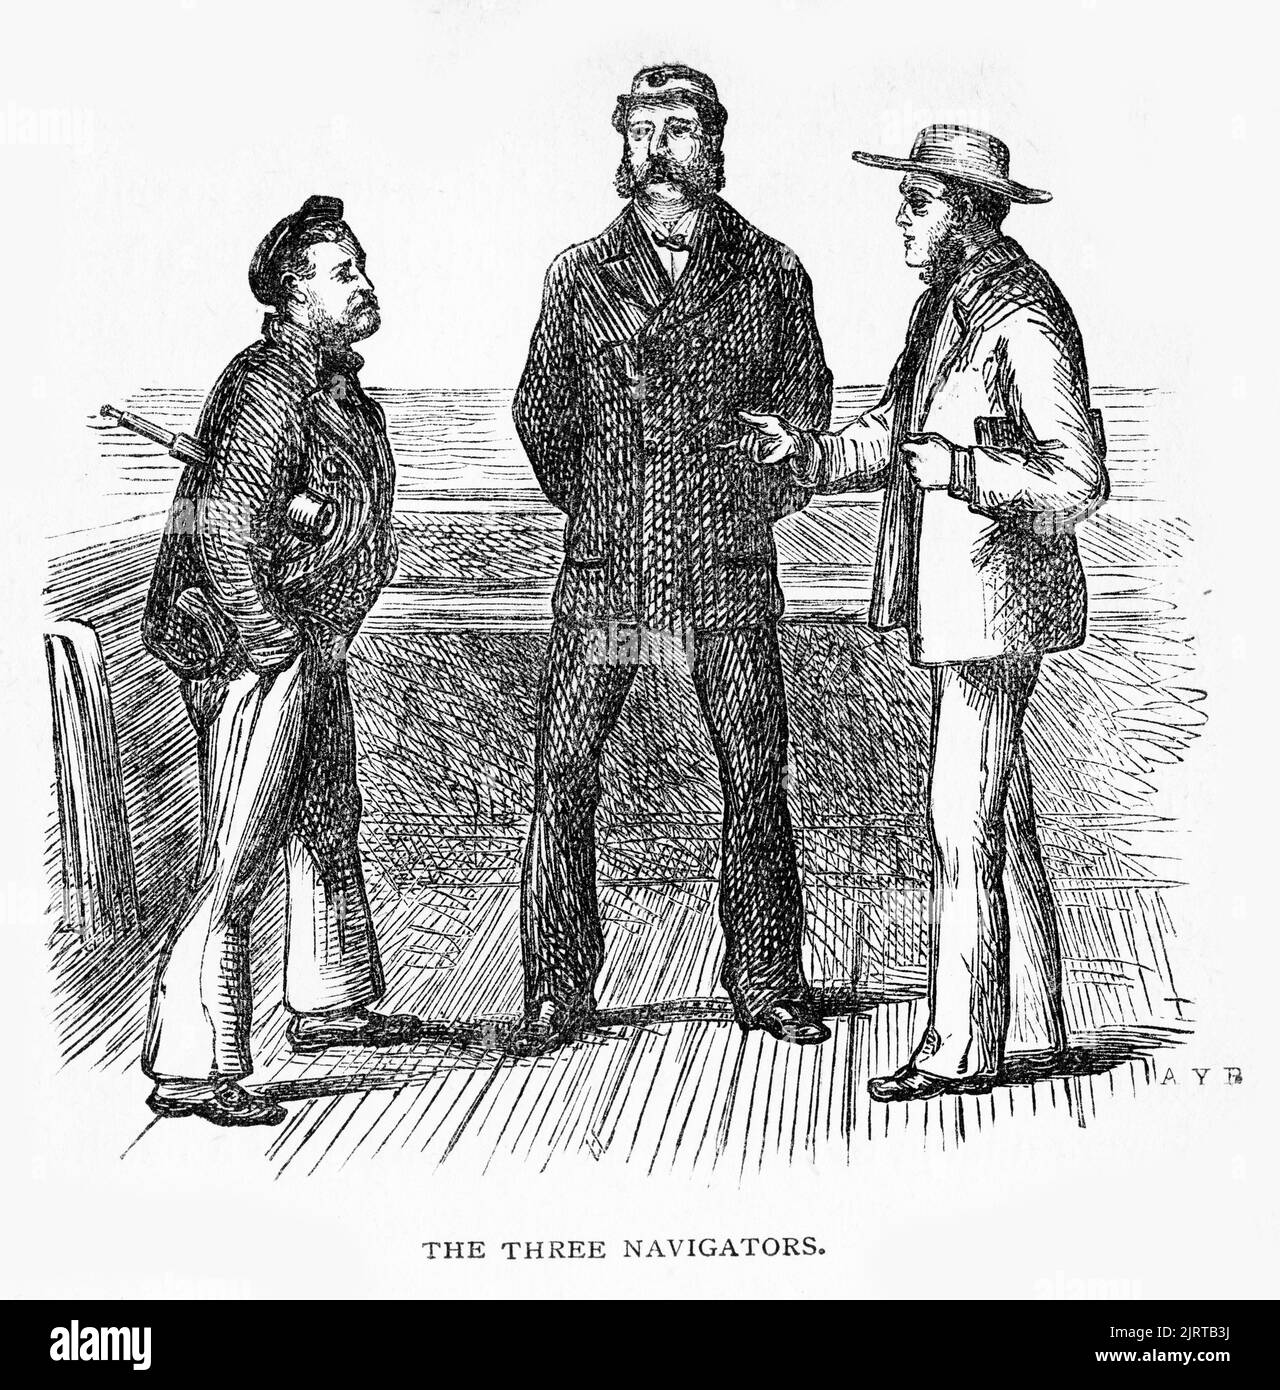 Engraving of the three navigators on the Sunbeam, from A Voyage in the Sunbeam by Baroness Anna 'Annie' Brassey (1839 – 1887), published 1878 Stock Photo